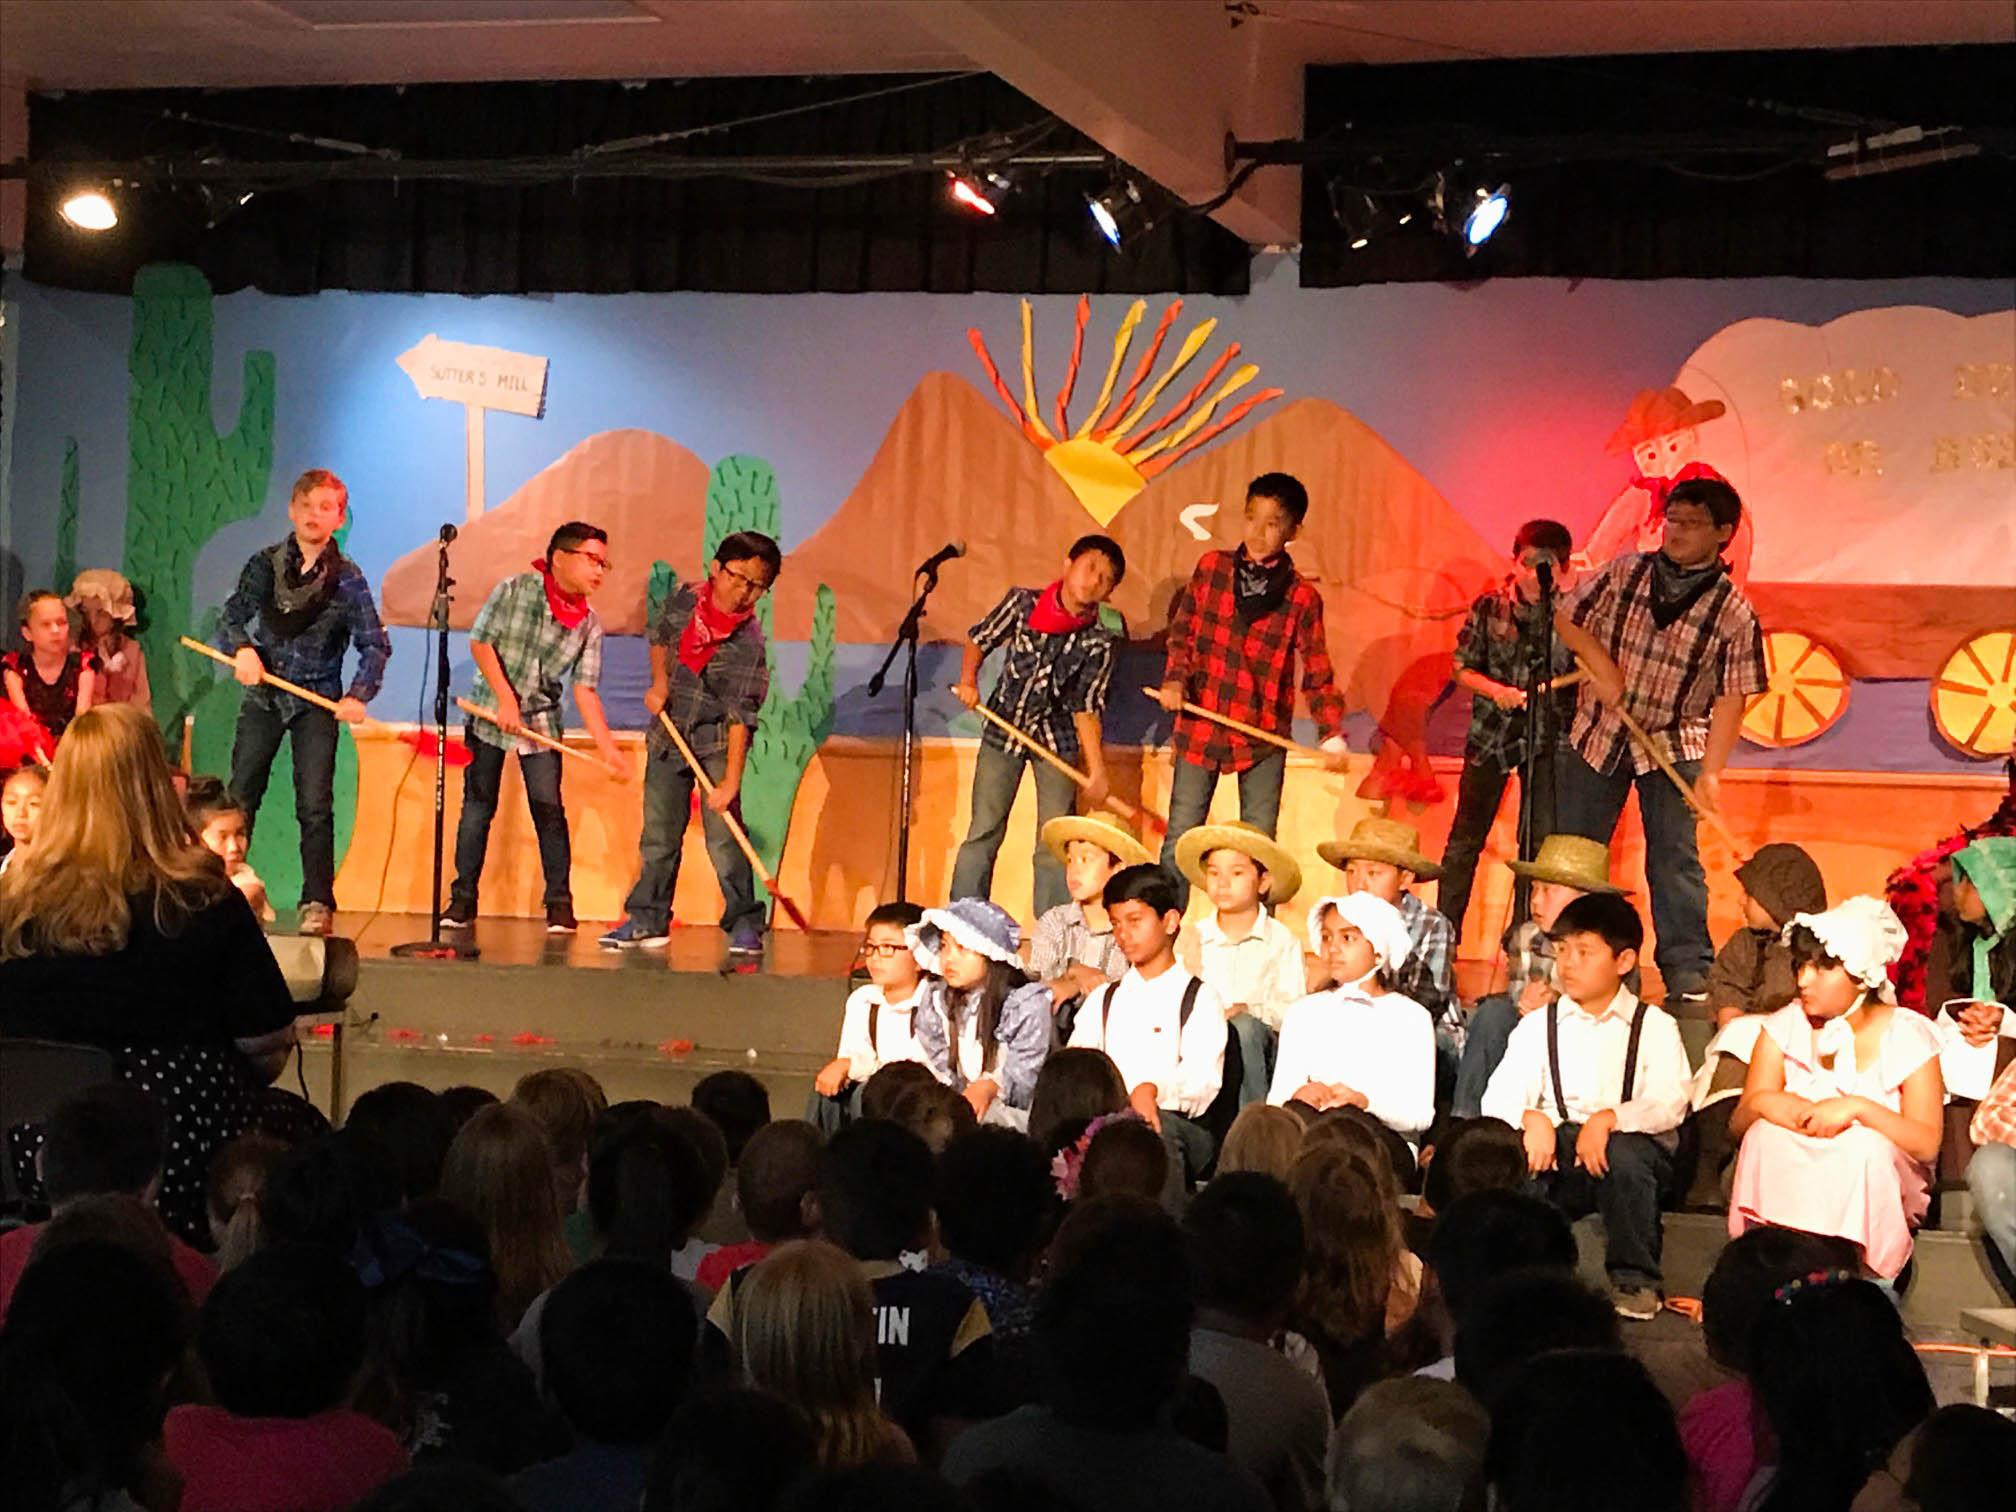 Golden Elementary students performing a gold rush show.